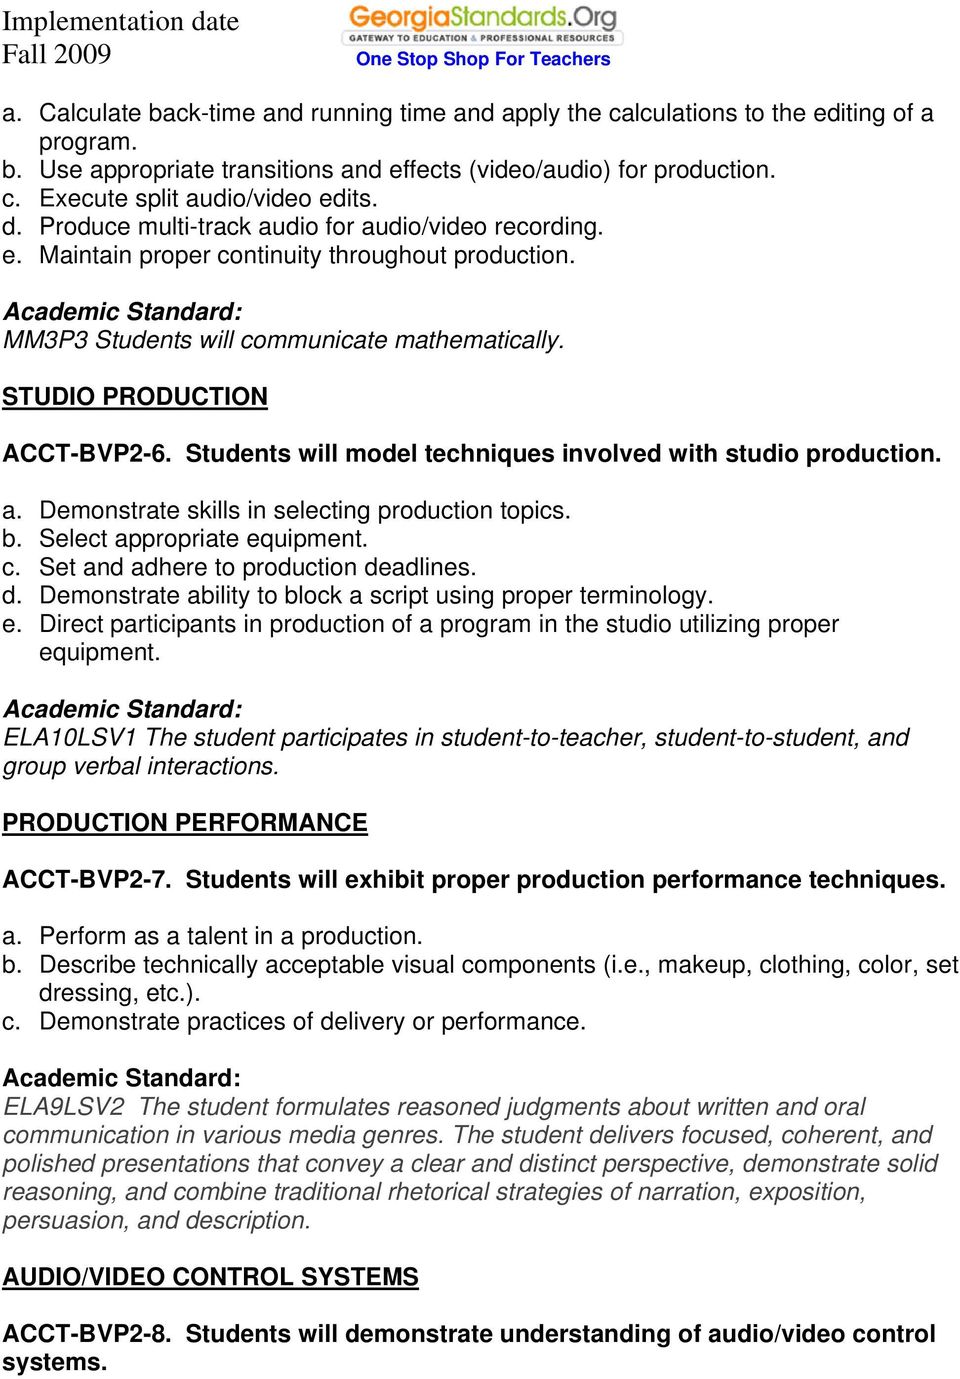 STUDIO PRODUCTION ACCT-BVP2-6. Students will model techniques involved with studio production. a. Demonstrate skills in selecting production topics. b. Select appropriate equipment. c.